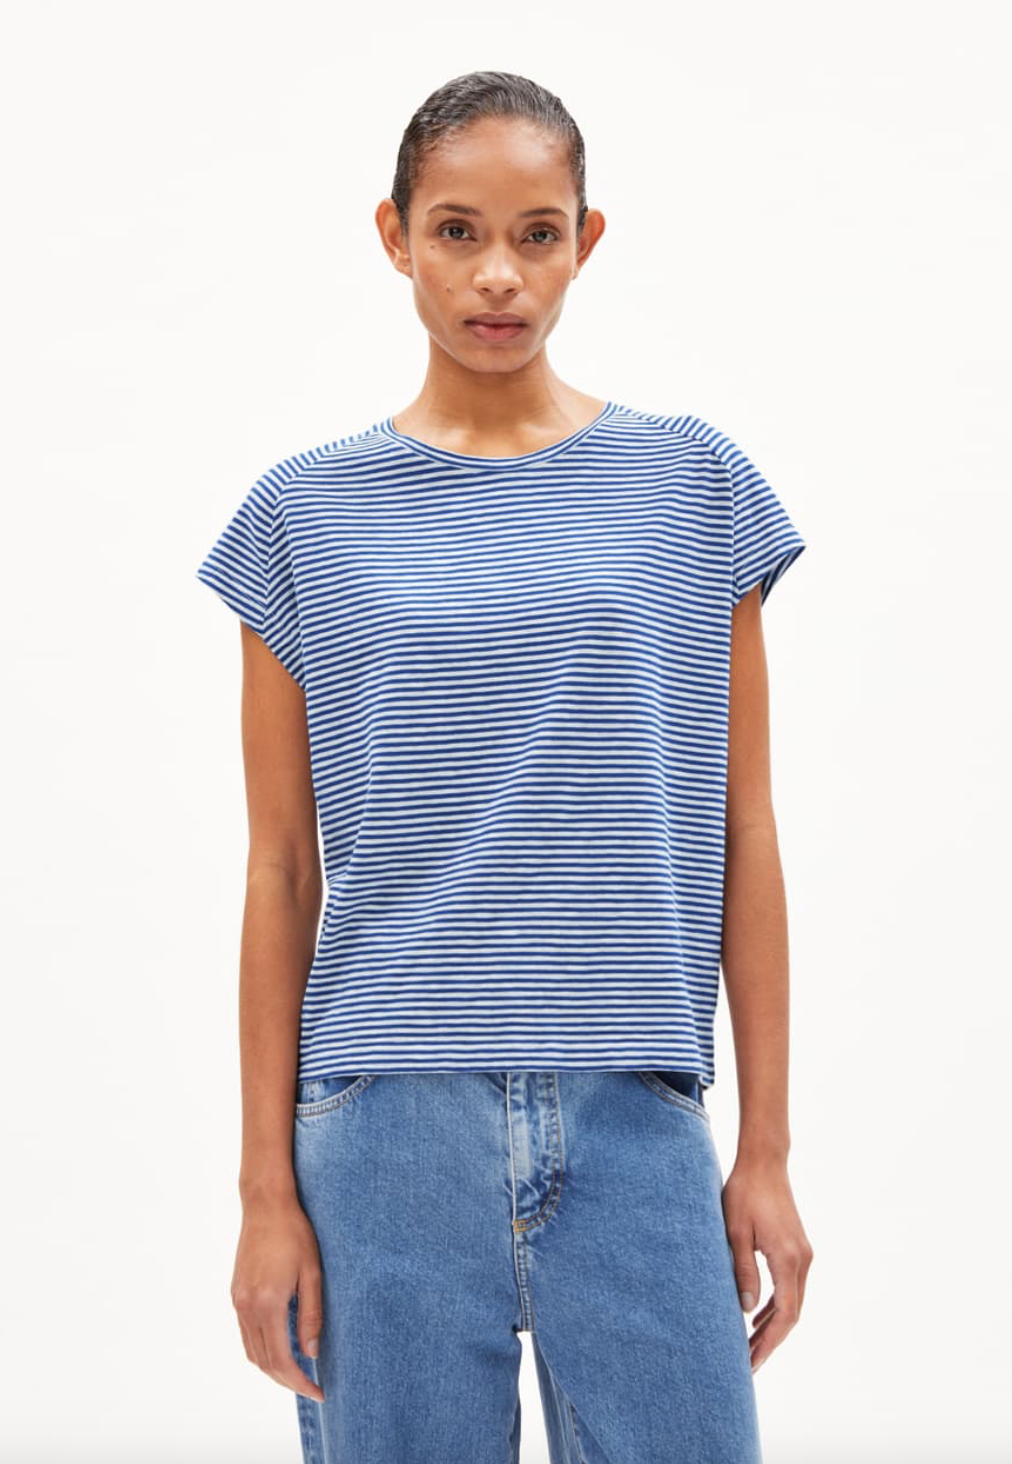 Armed Angels Oneliaa Lovely Stripes T-Shirt